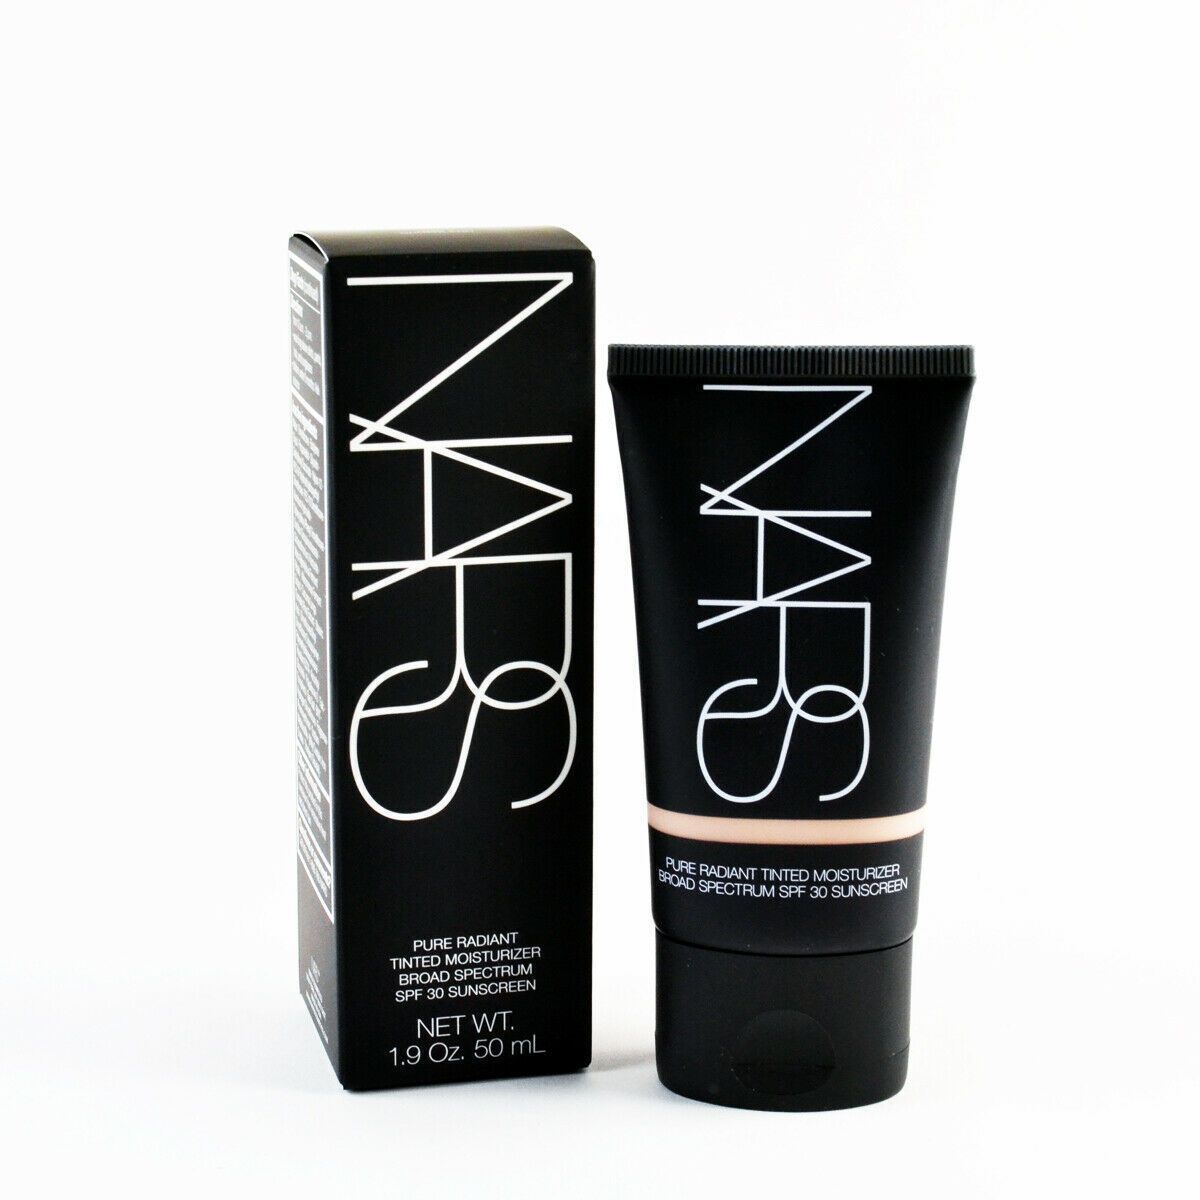 NARS PURE RADIANT TINTED MOISTURIZER SPF 30 100% AUTHENTIC-CHOOSE YOU COLOR-SHIP